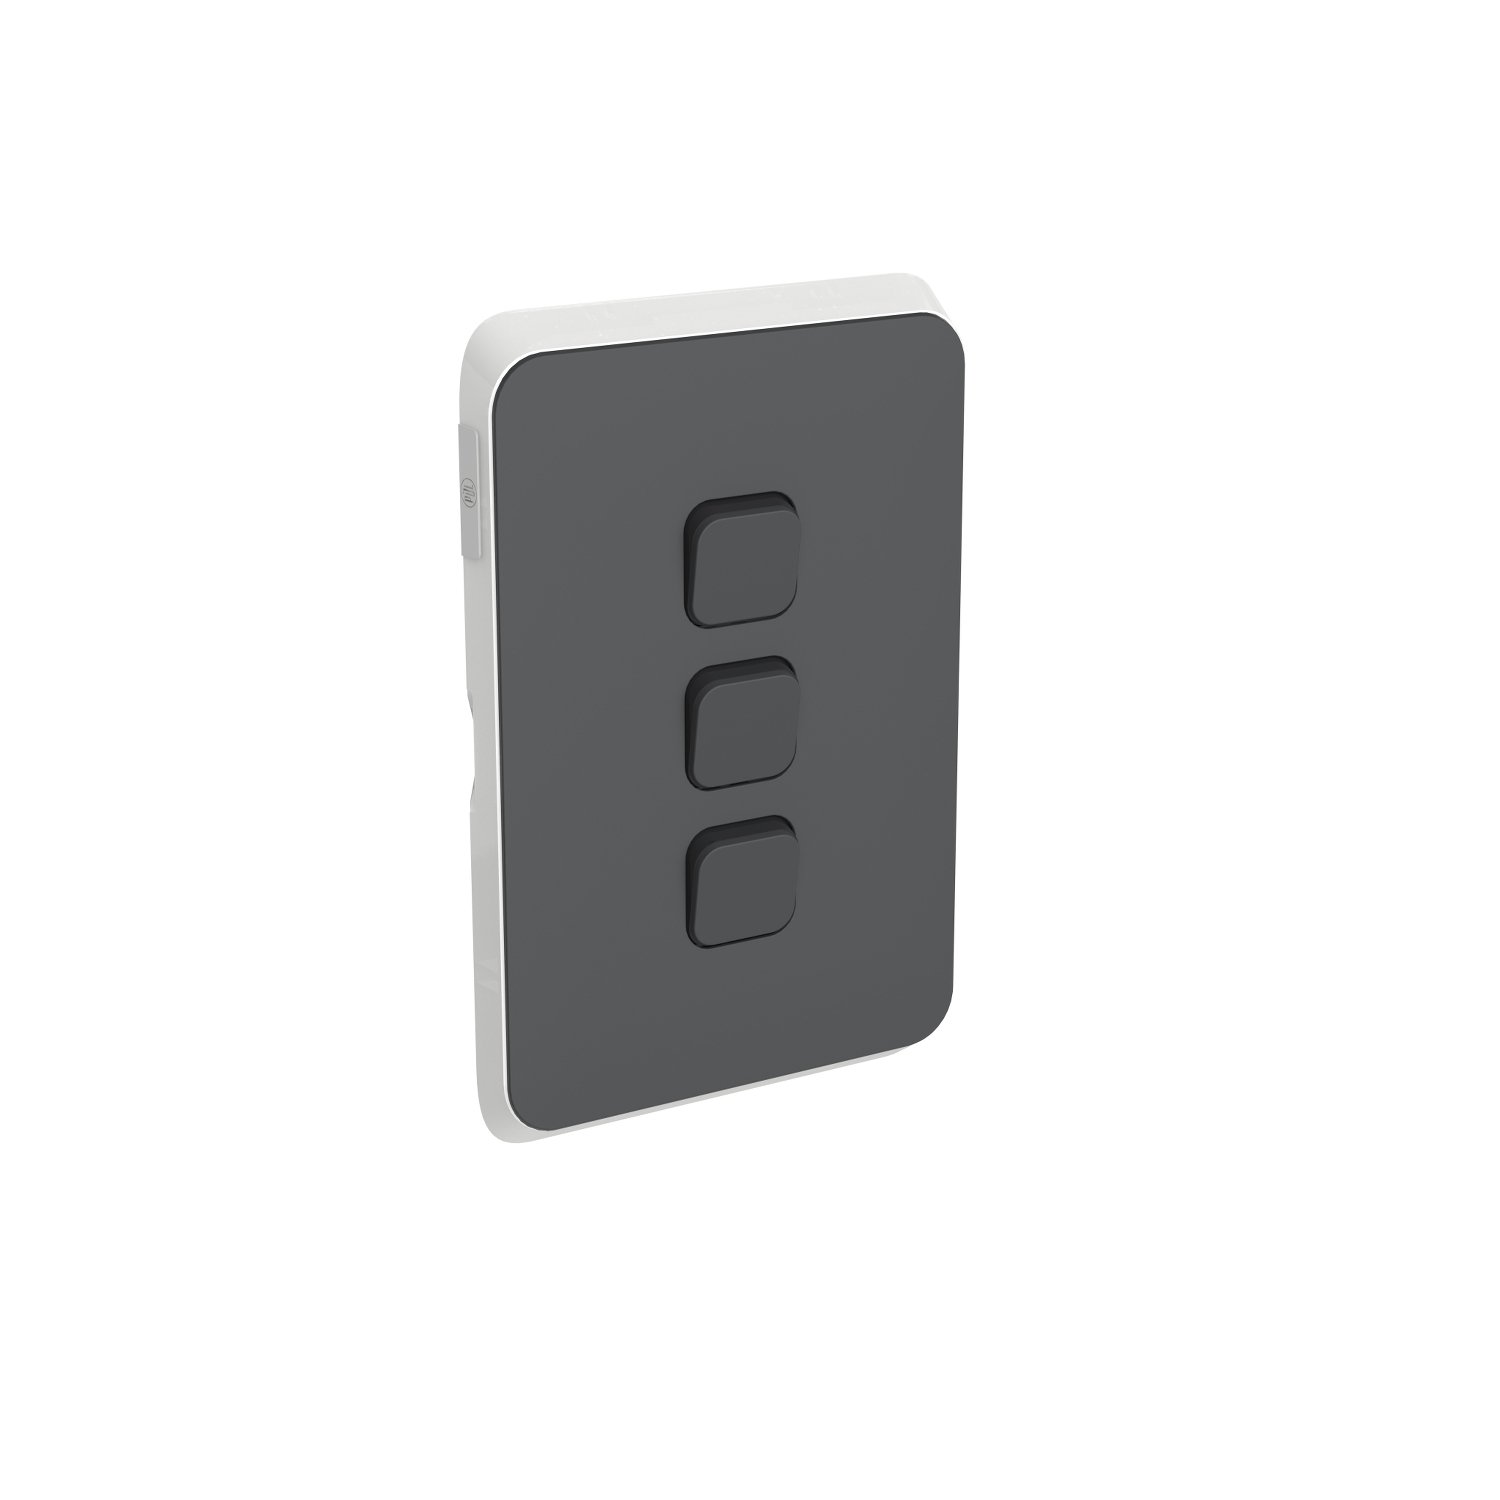 PDL383C-AN - PDL Iconic Cover Plate Switch 3Gang - Anthracite